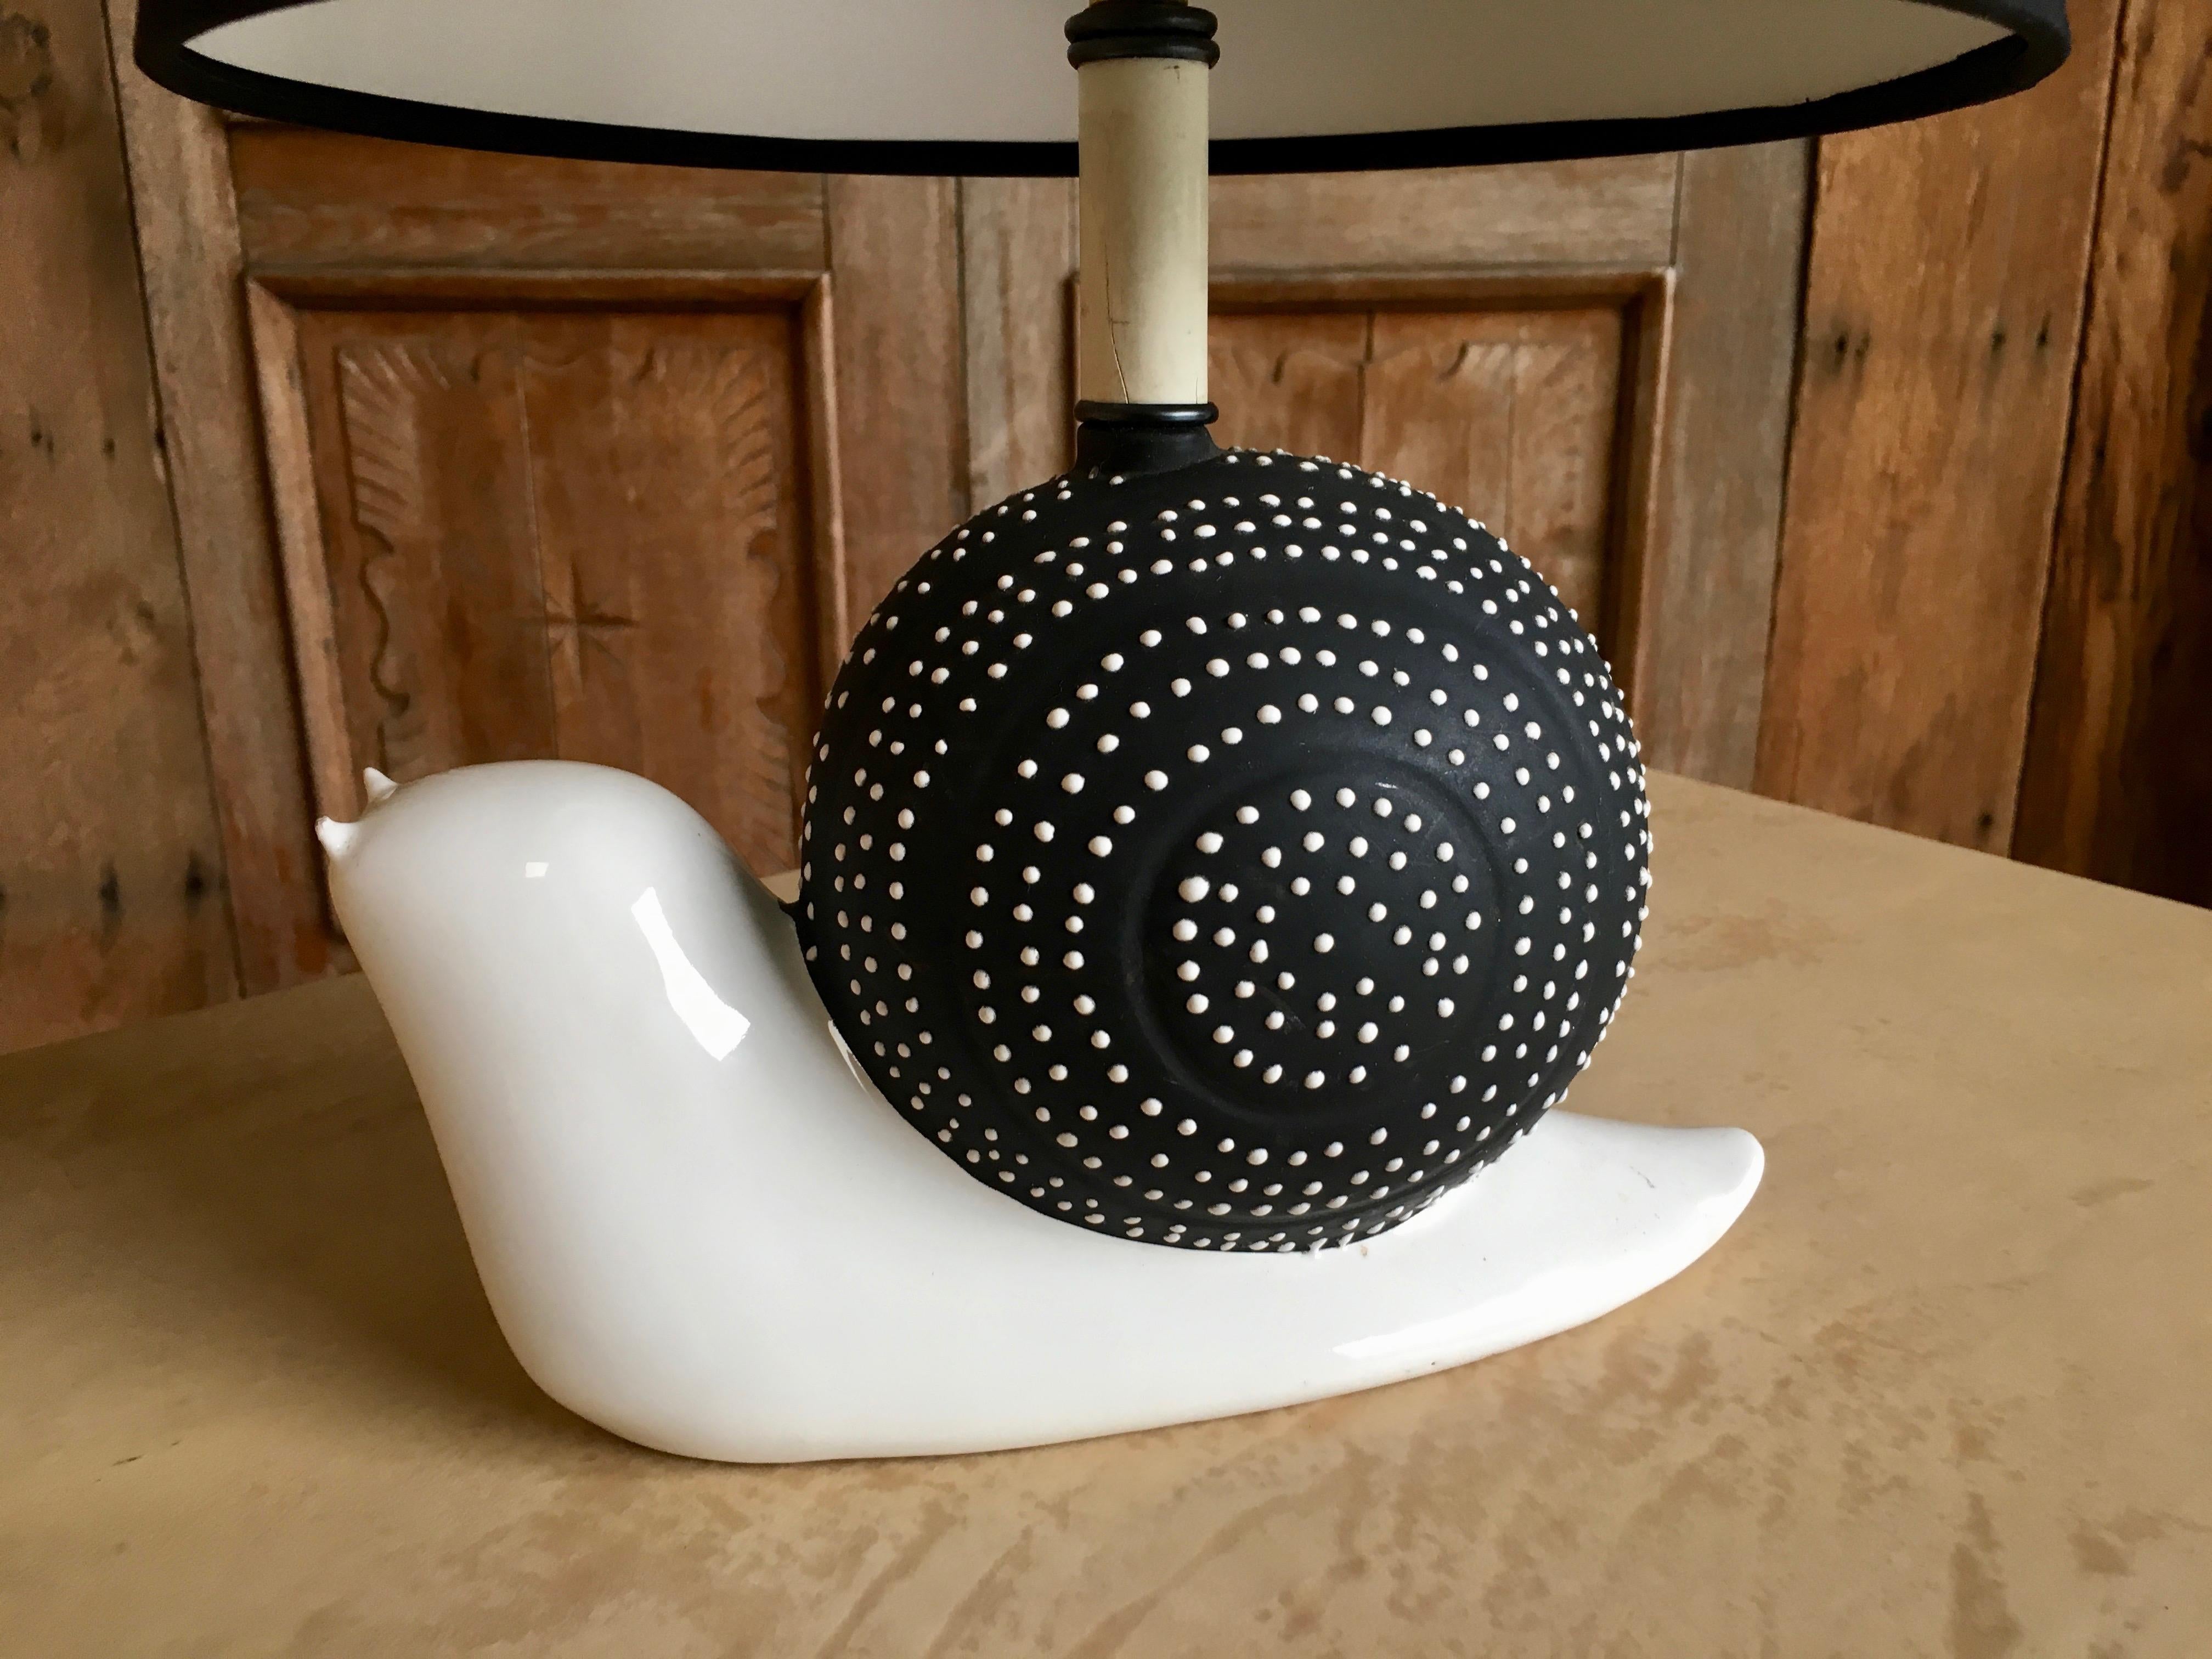 Ceramic snail lamp with new shade.